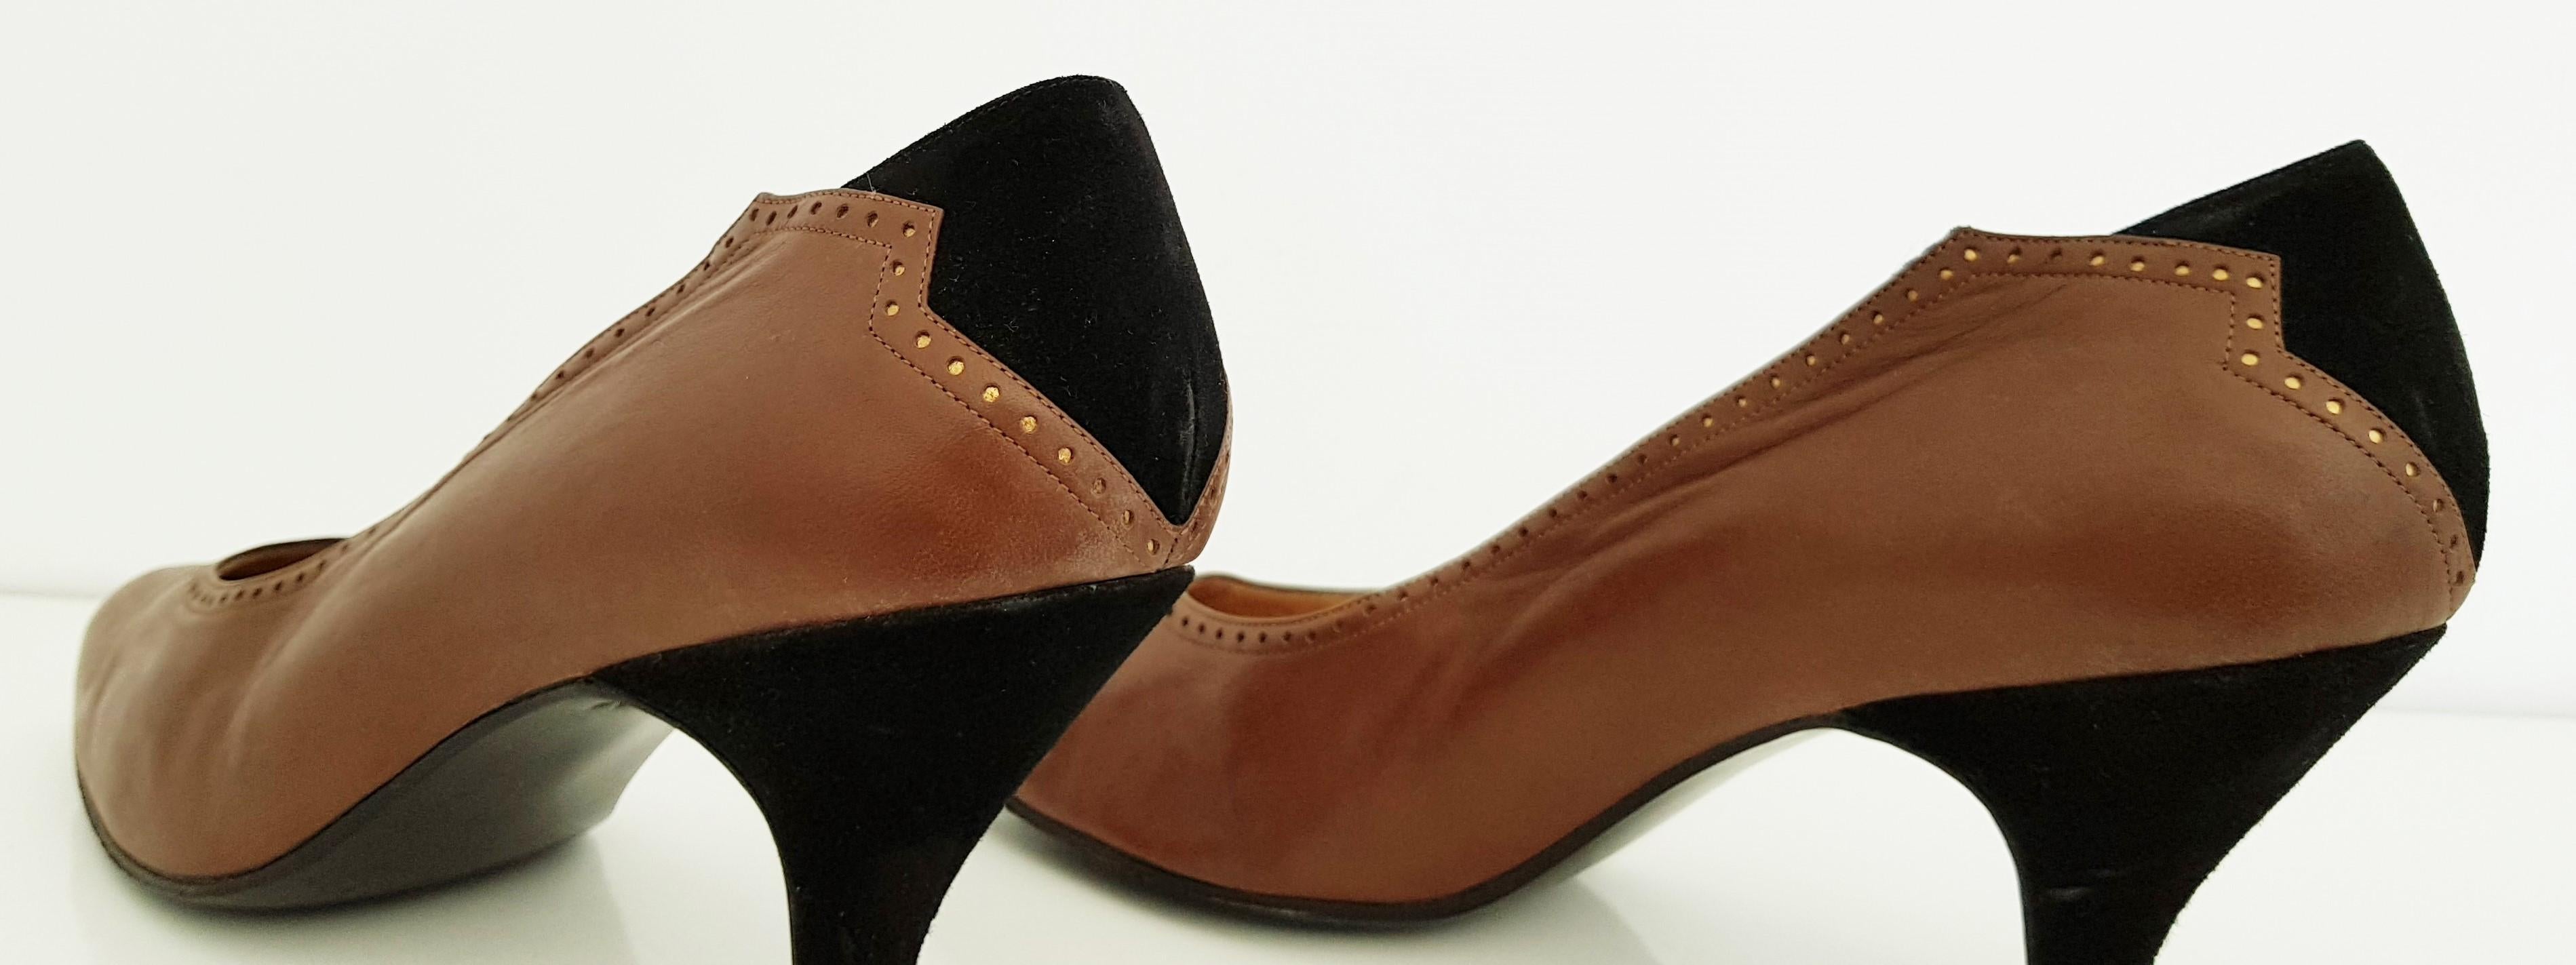 Maud Frizon Black Velvet and Brown Leather Heels - Size 39 1/2 (EU) For Sale 5